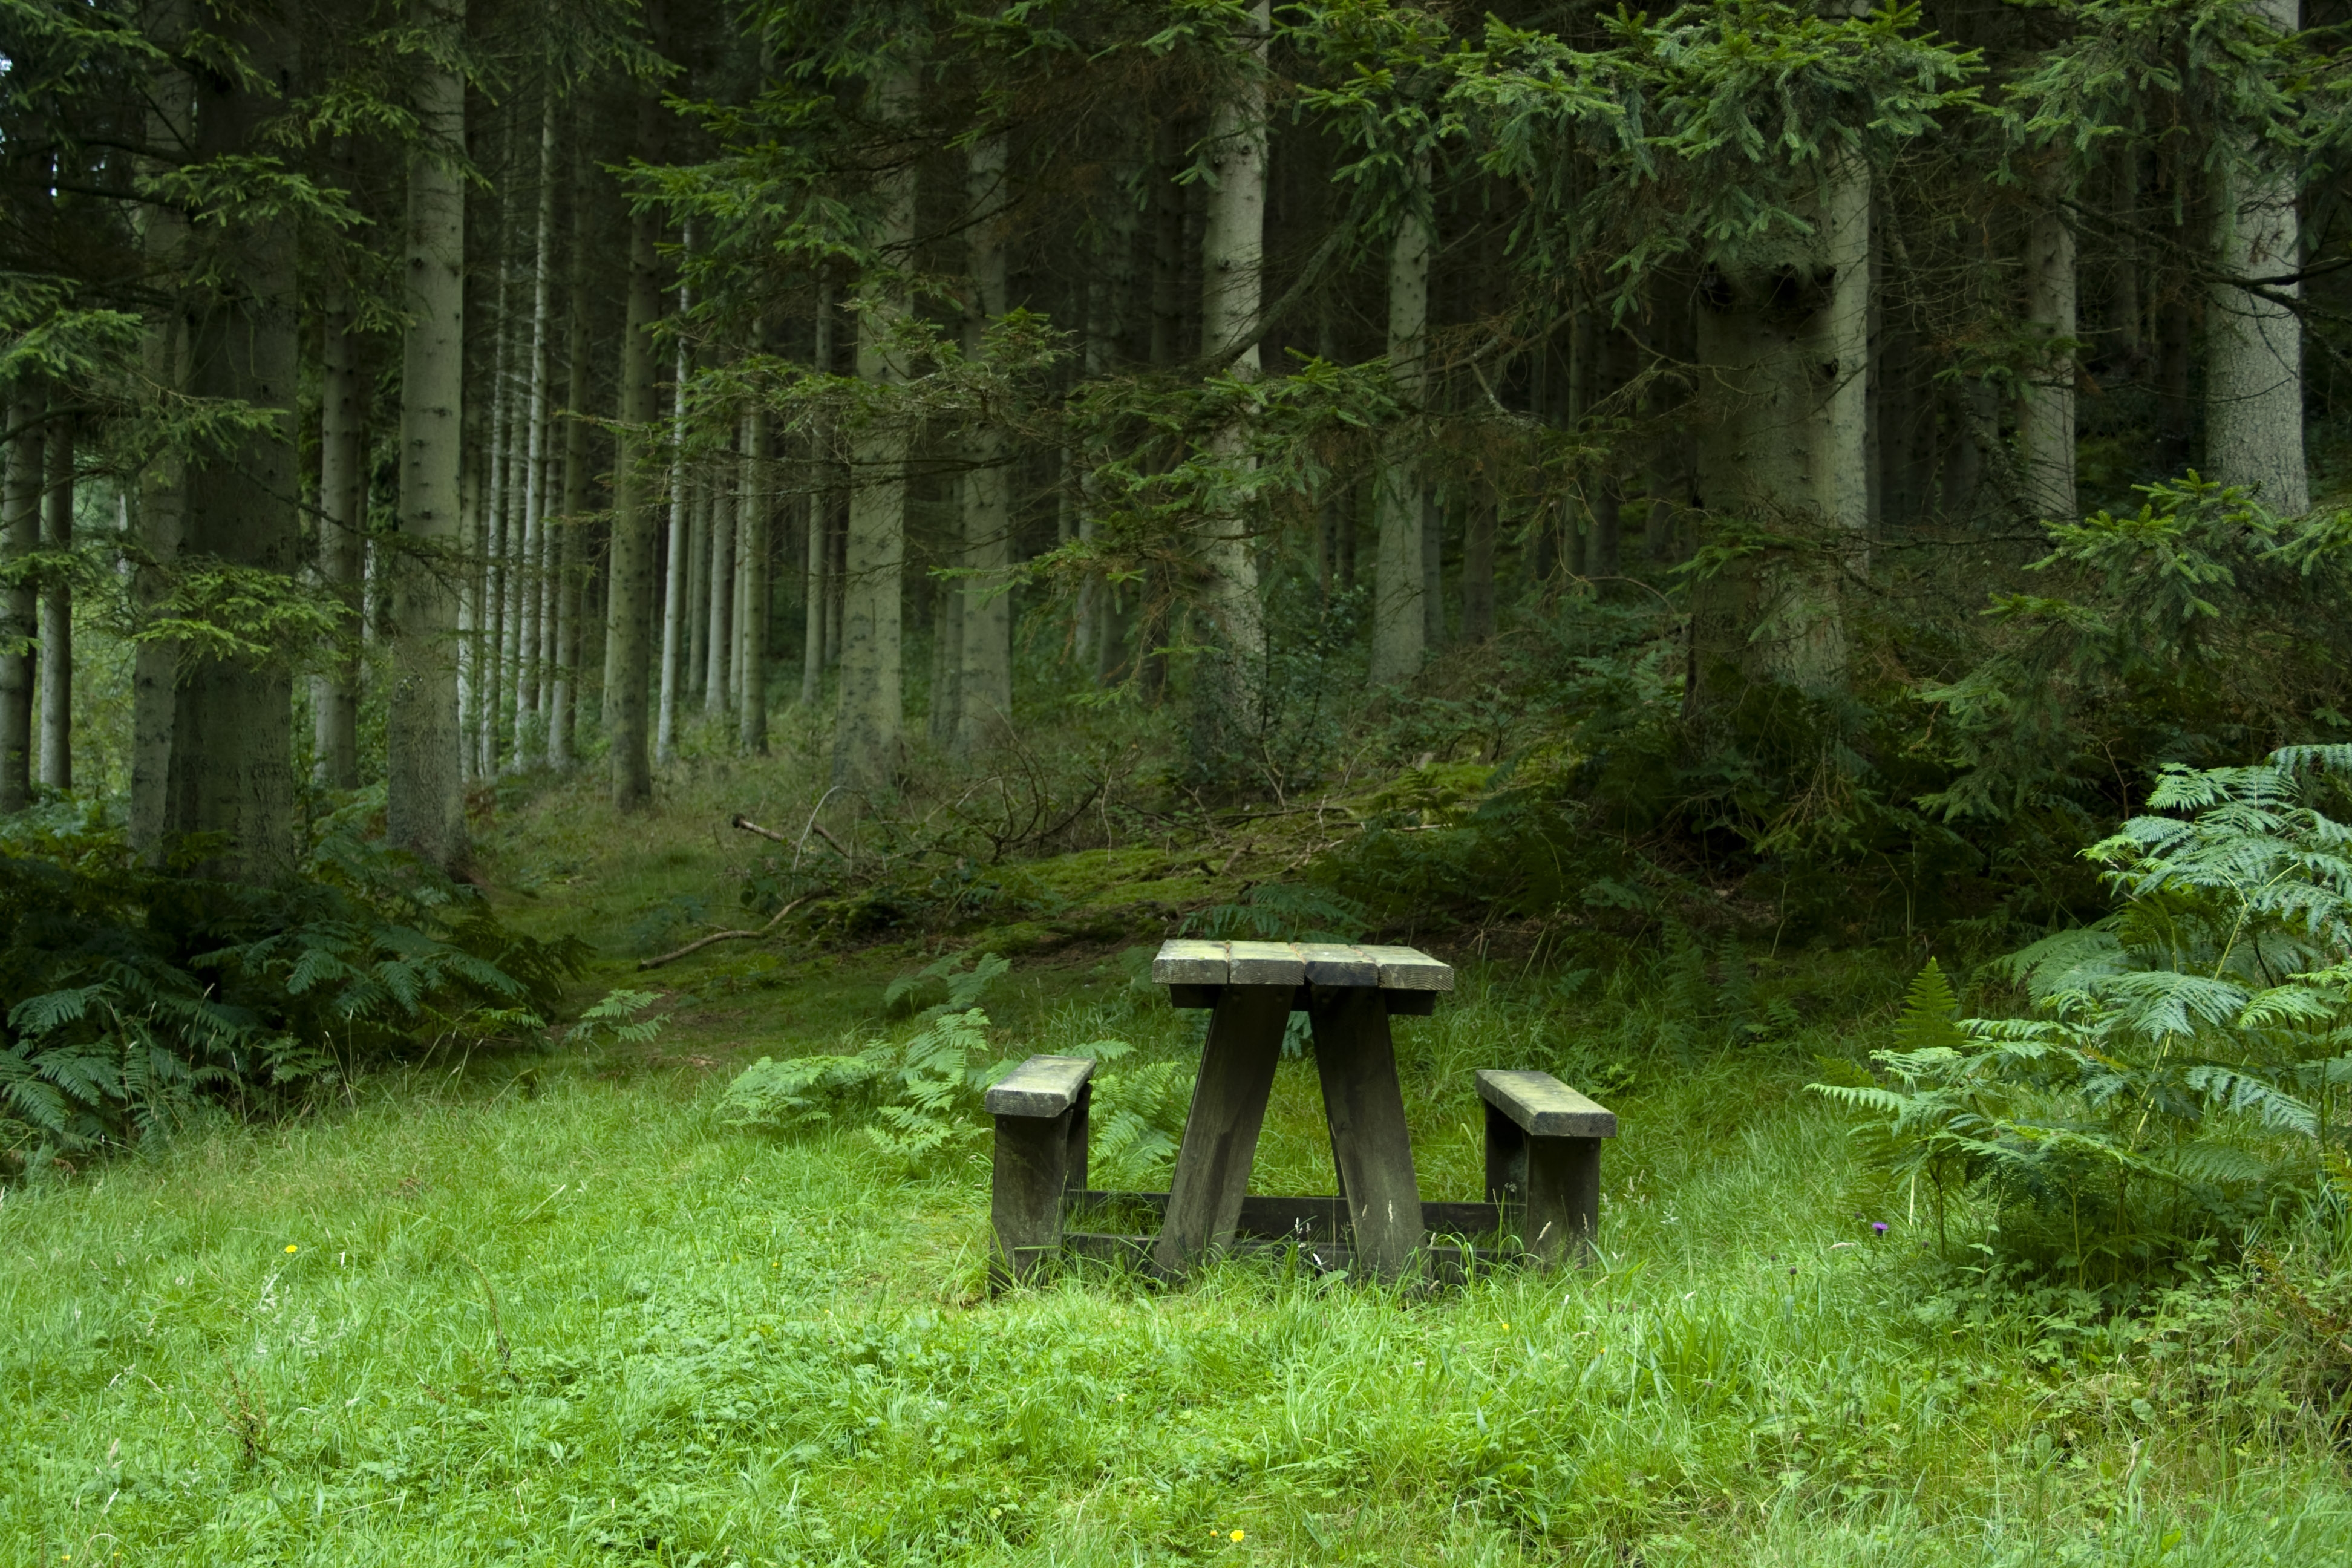 table, benches, landscape, nature, forest, polyana, glade, side table